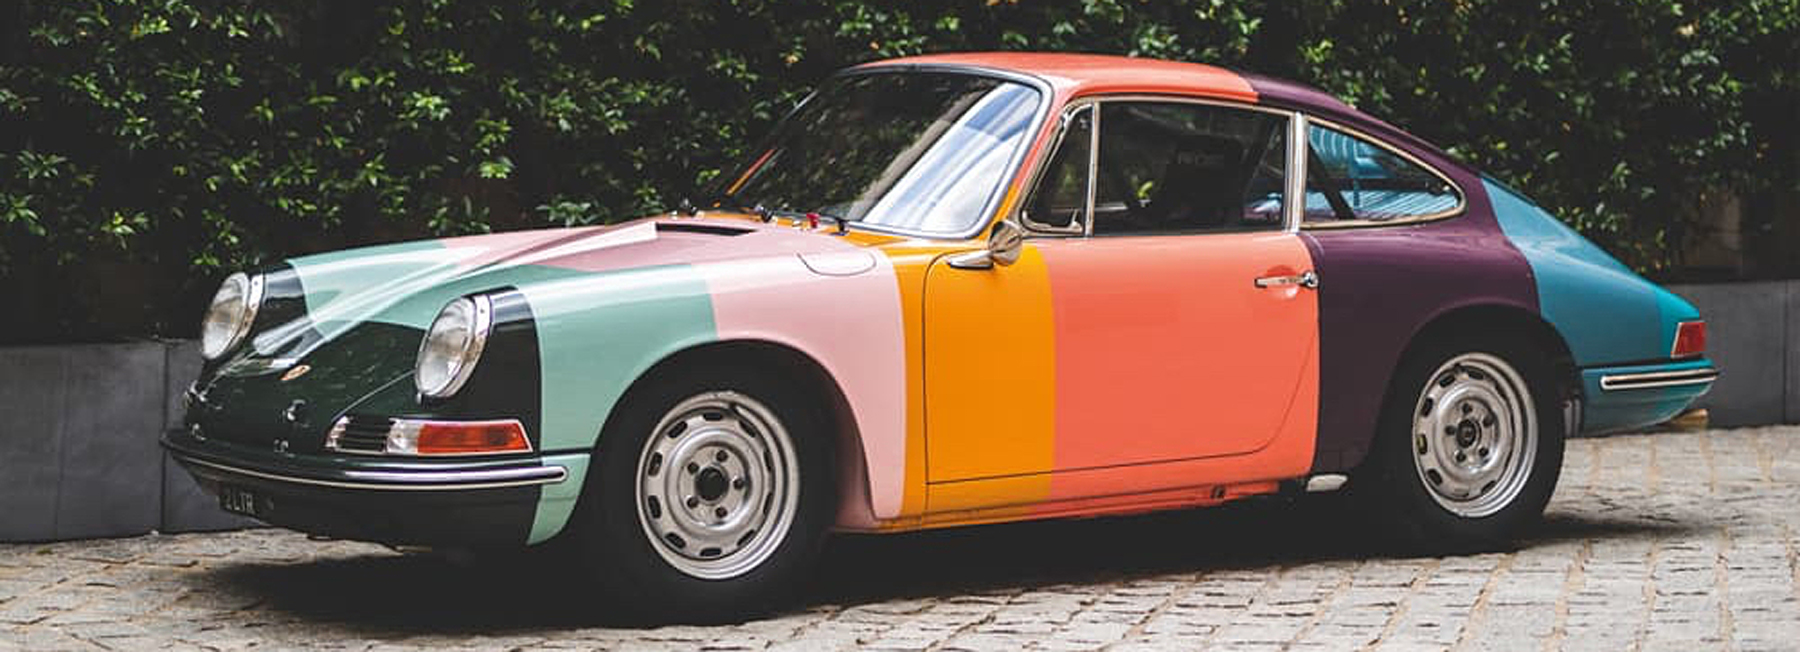 this porsche 1965 911 racer has been made over in paul smith's iconic stripes